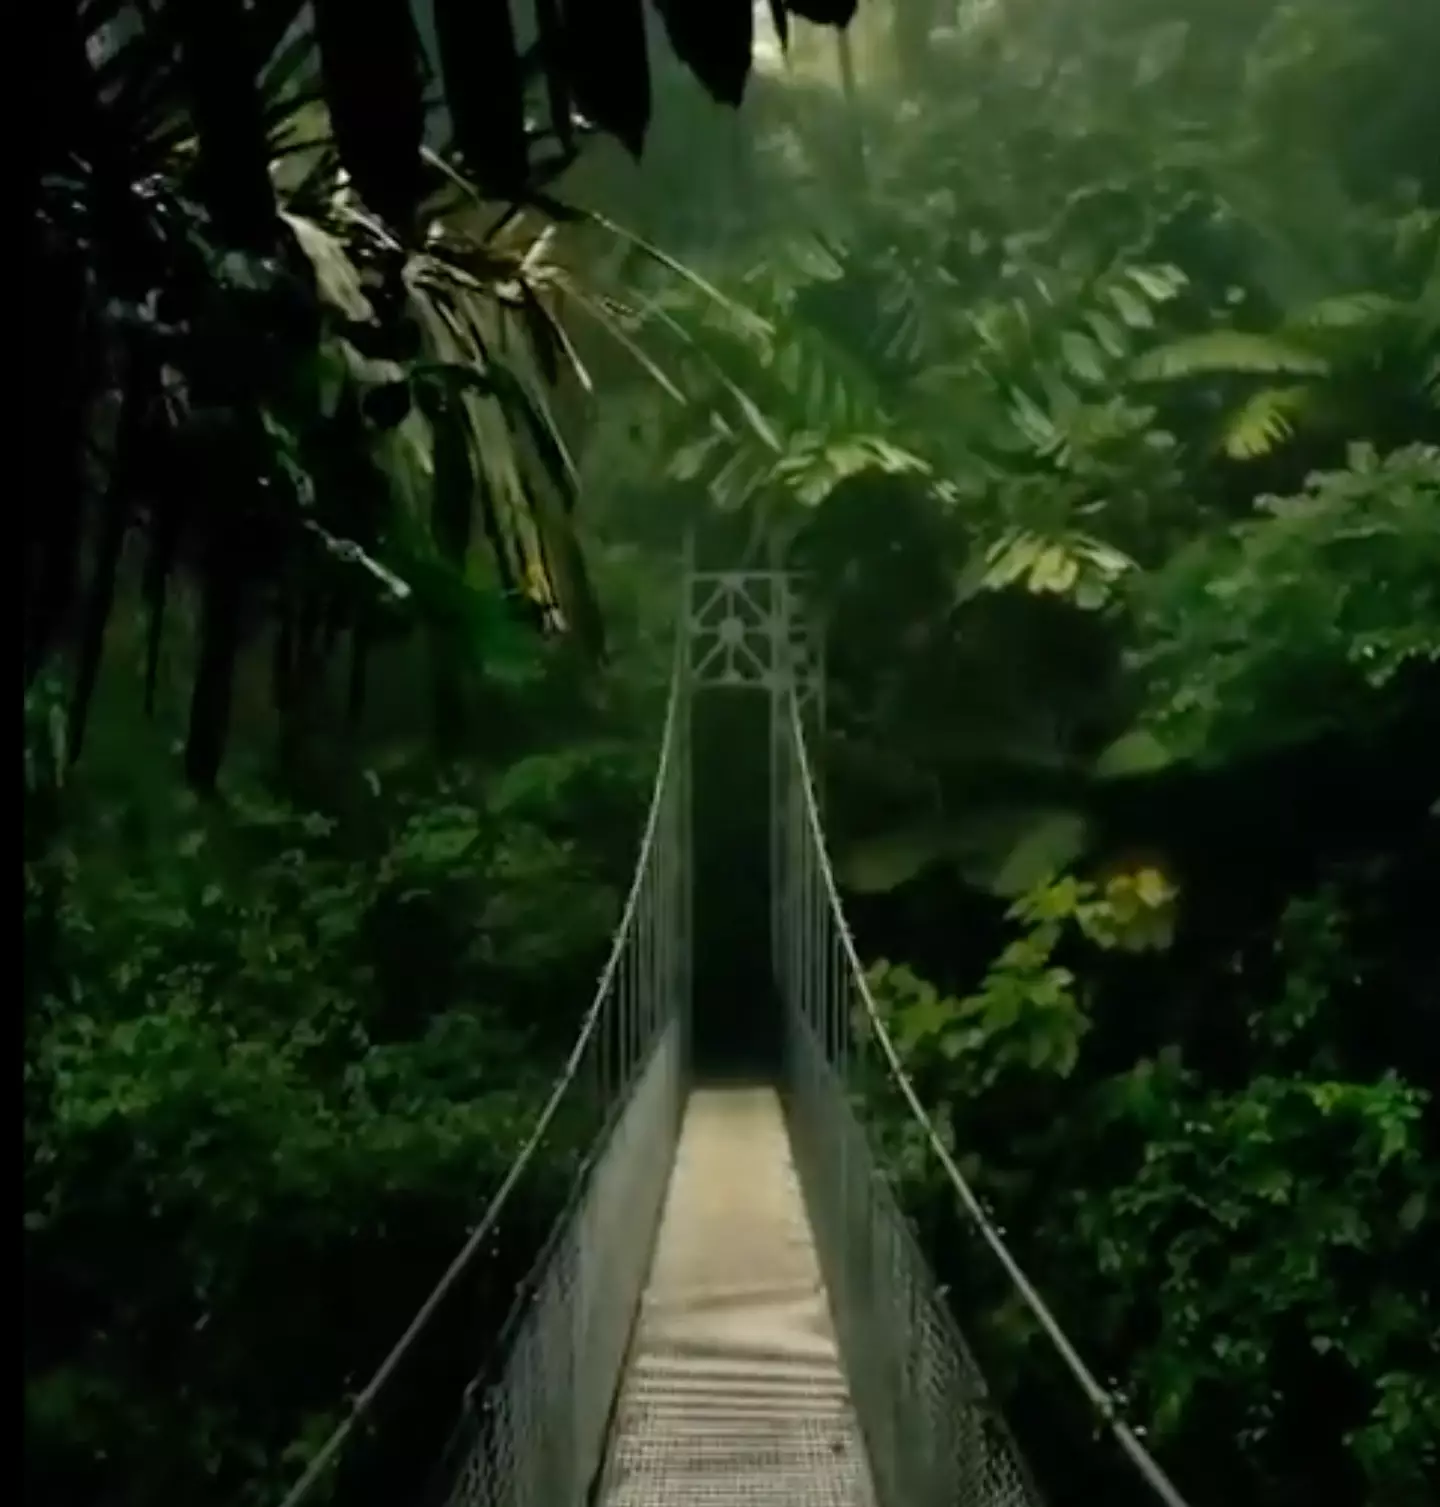 The teaser trailer showed the iconic rope bridge.